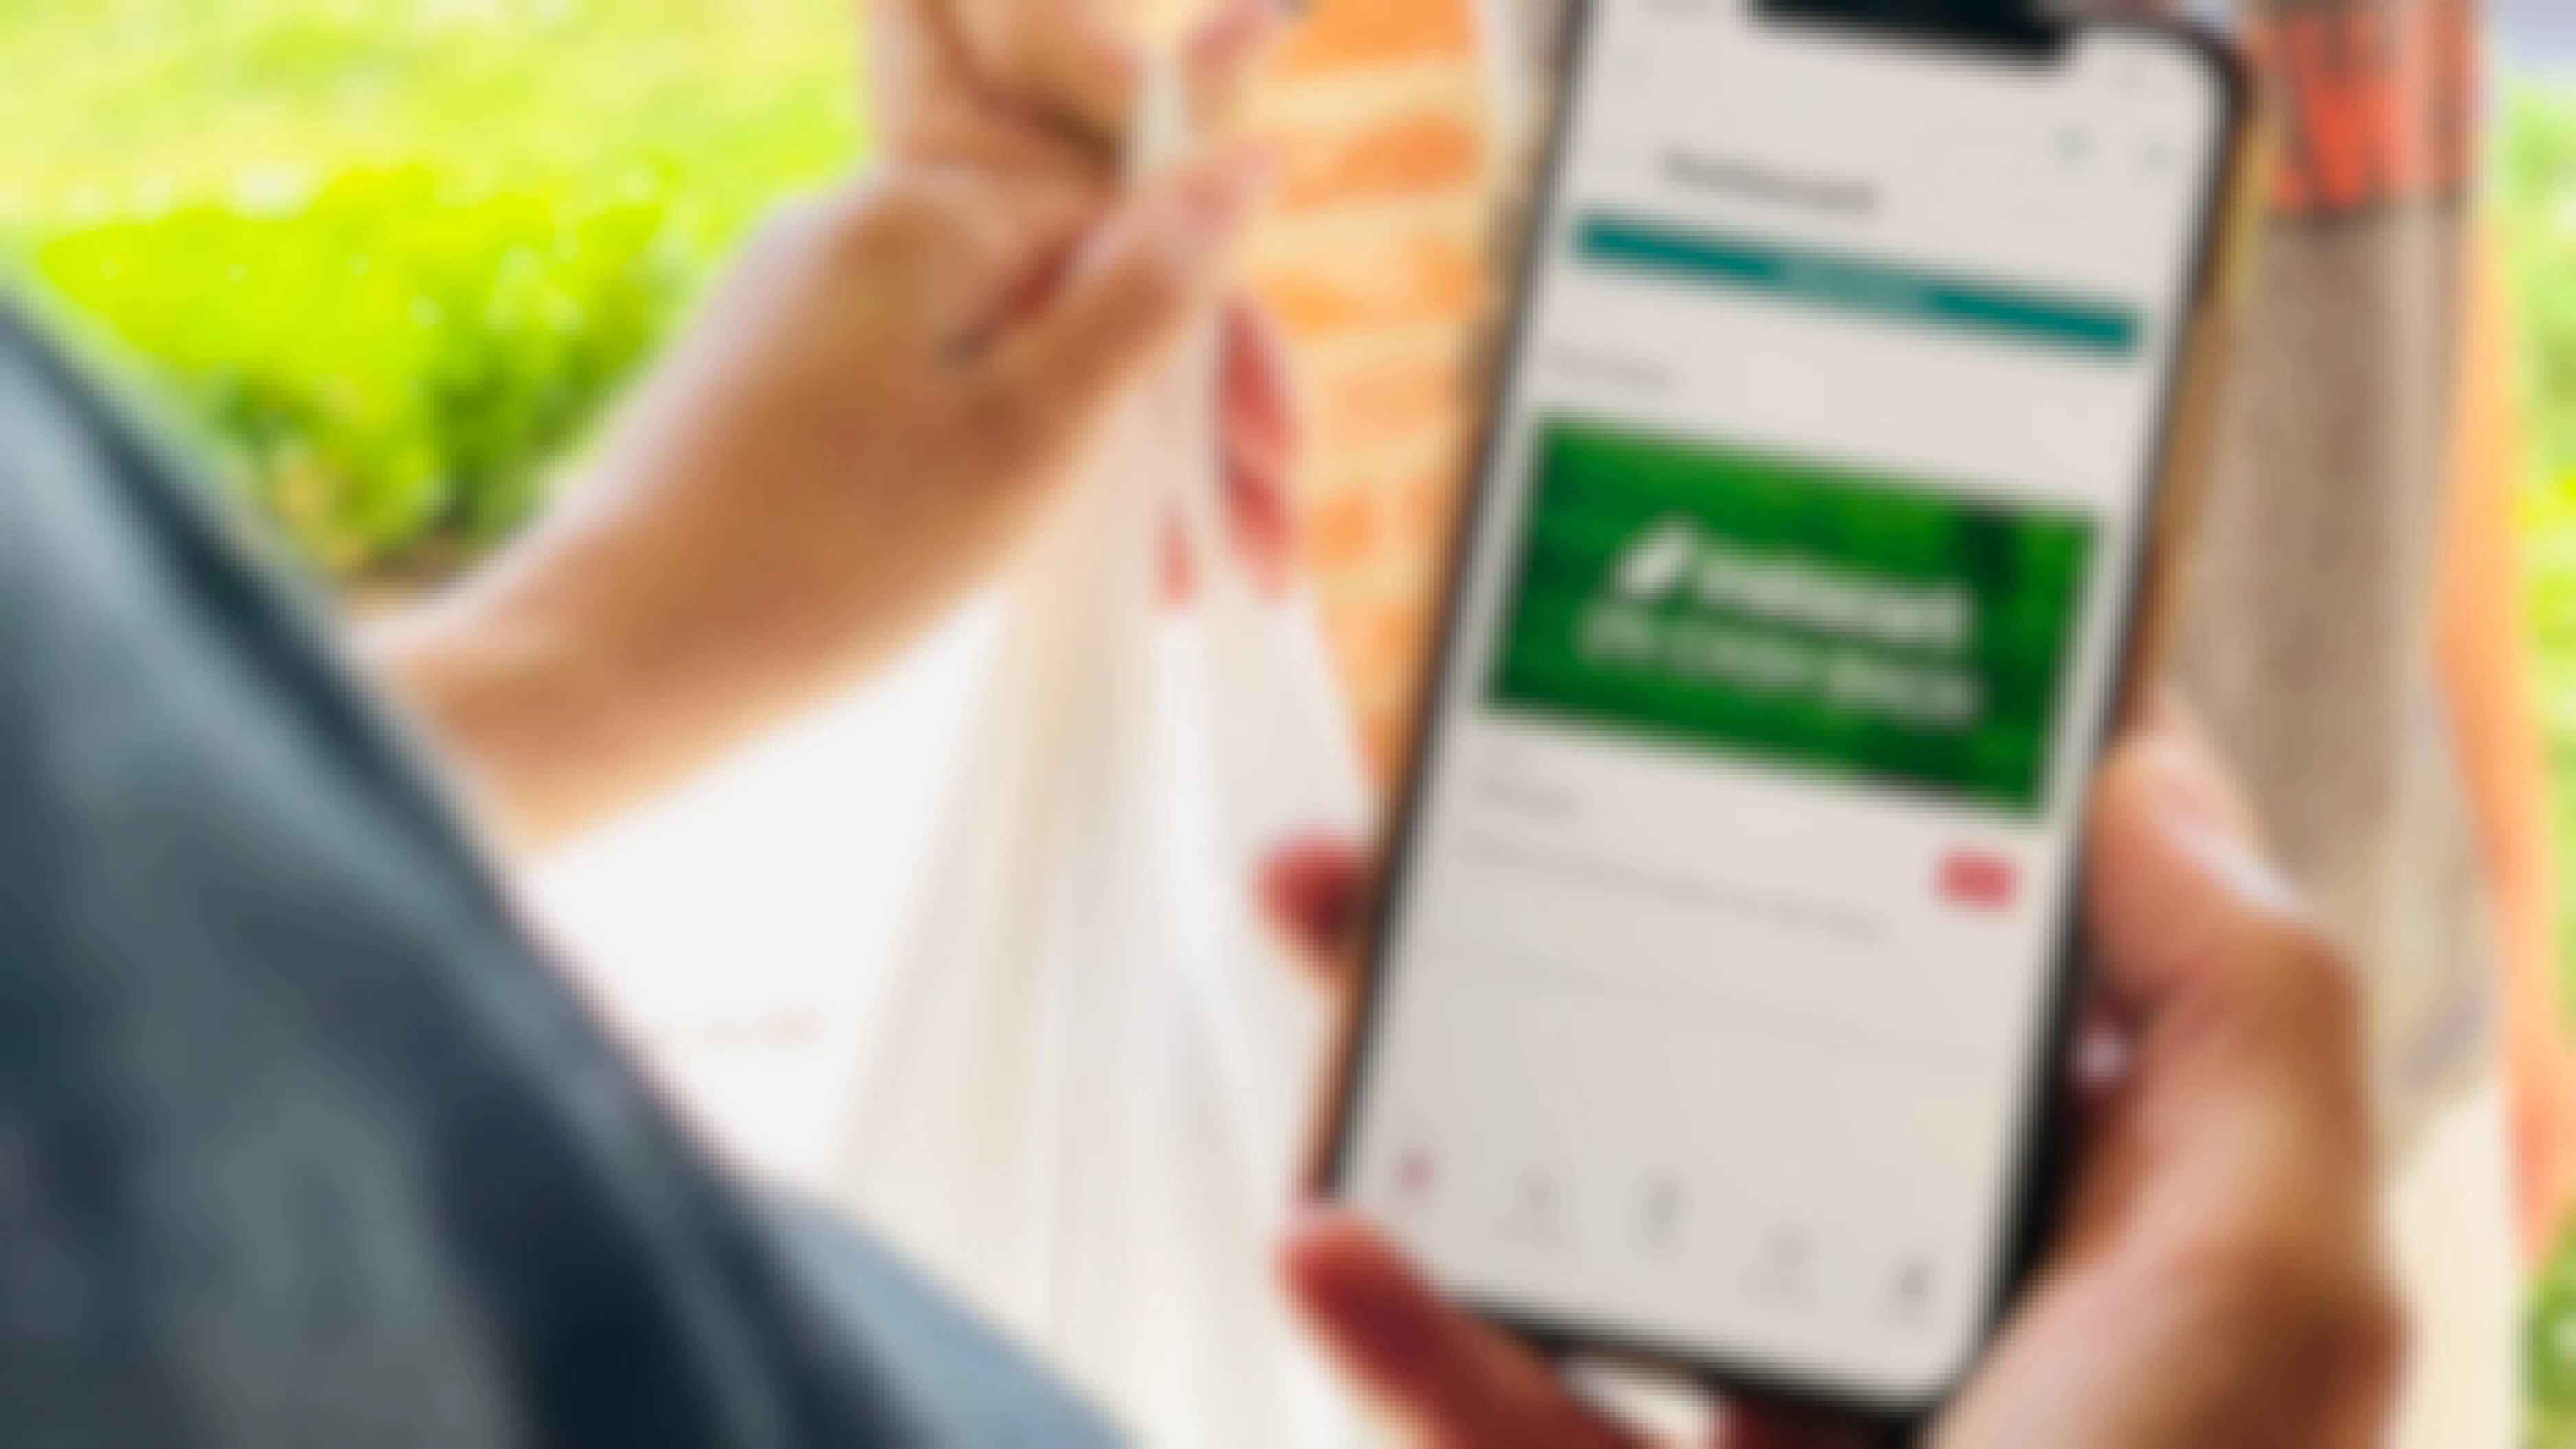 Order groceries from Amazon or Instacart and get cash back from Ibotta.